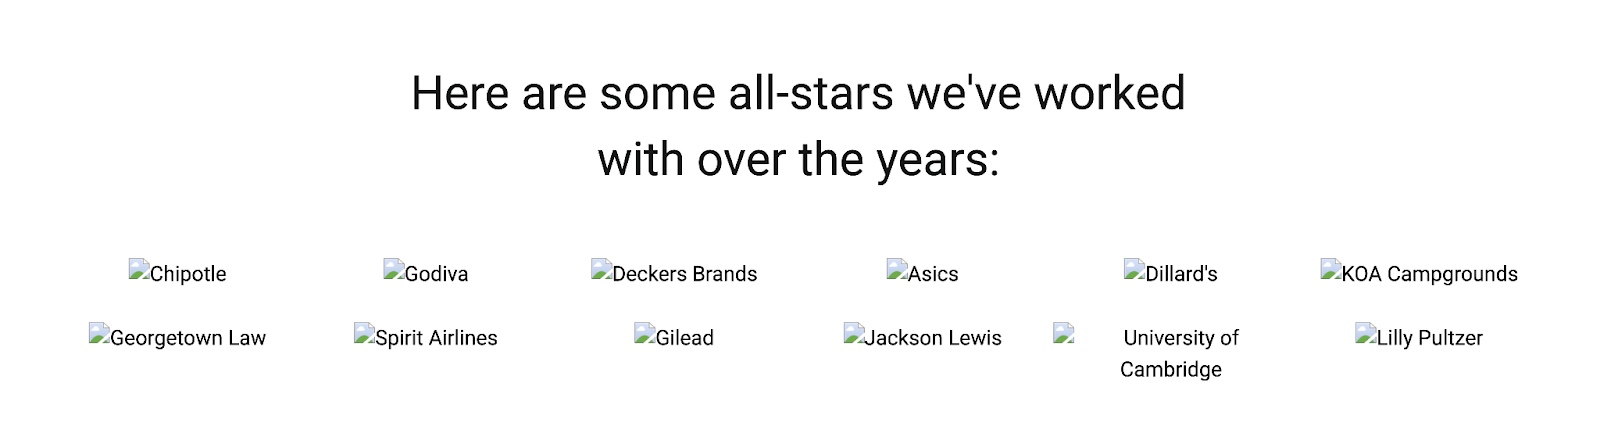 Broken image icons alongside various brand names, such as Chipotle and Godiva. They appear below a subheading that says "Here are some all-stars we've worked with over the years:."